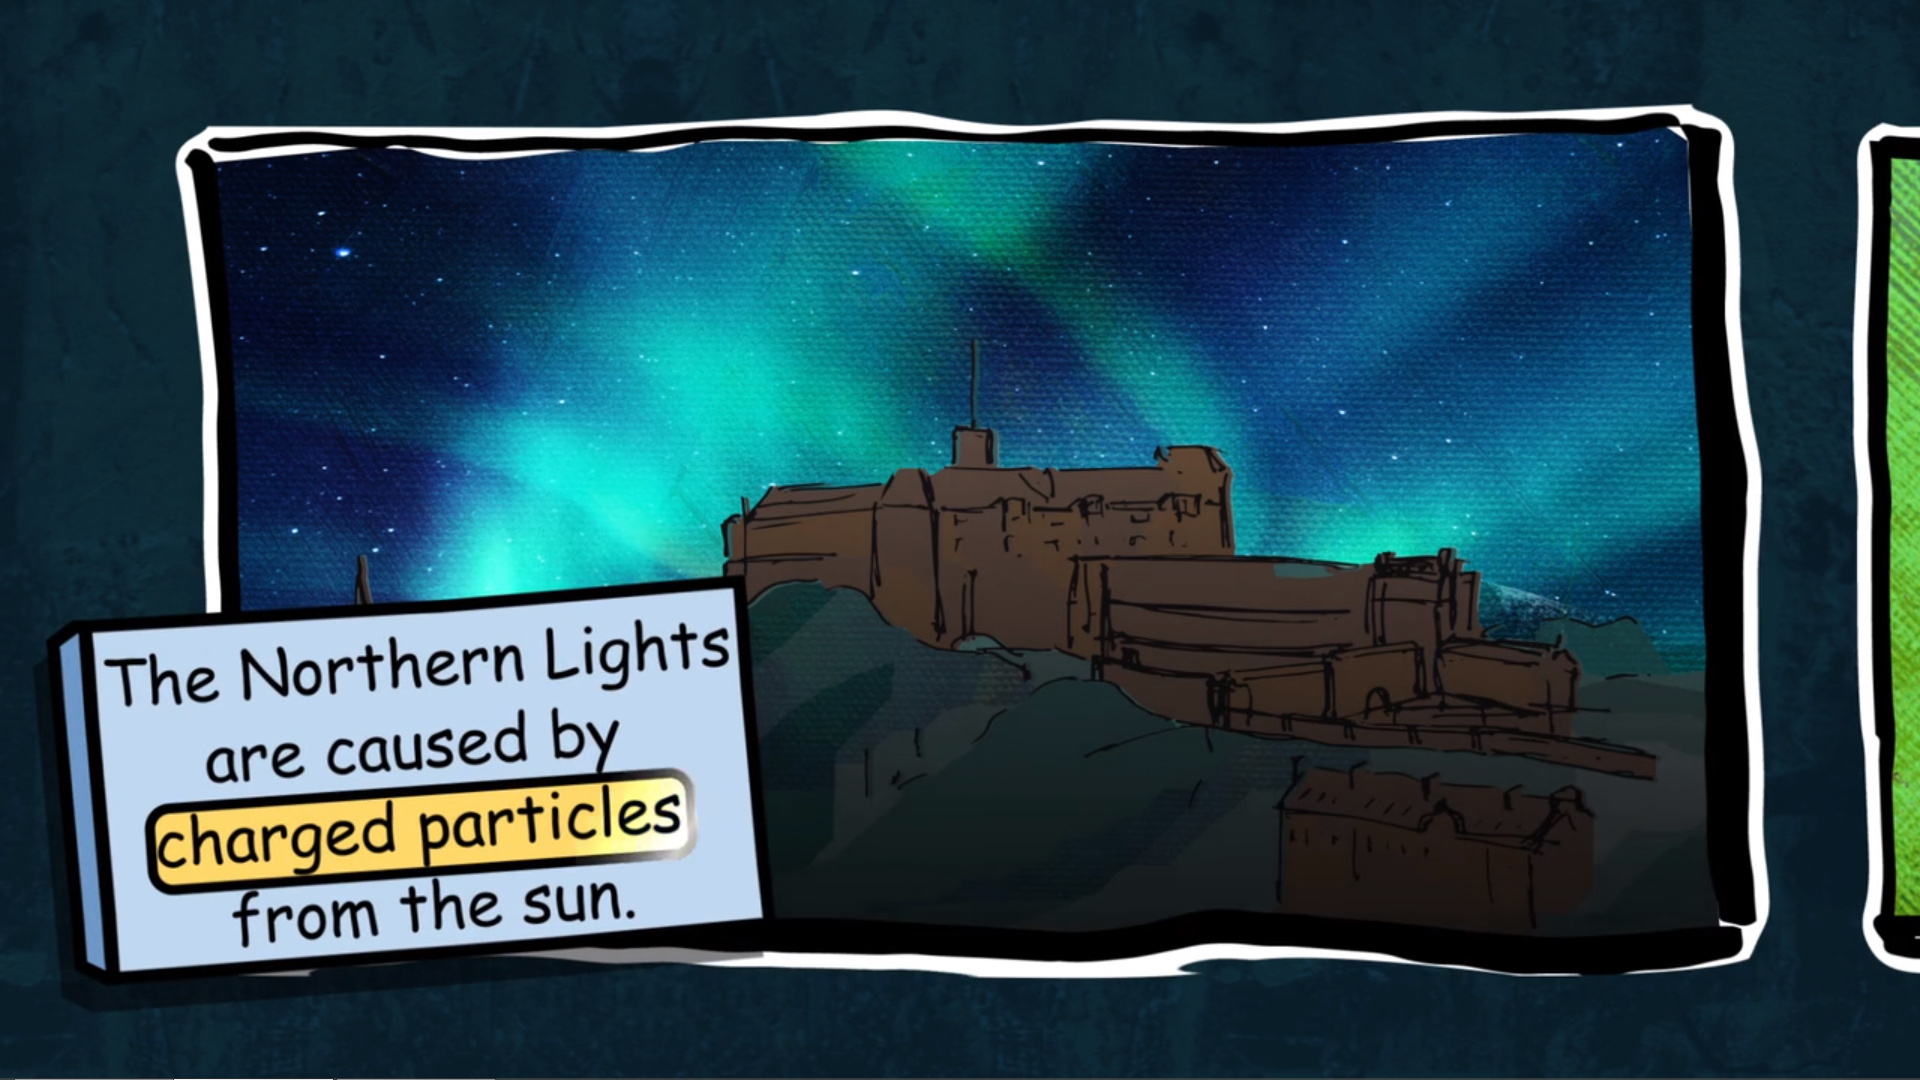 a panel from the comicbook-style animated video showing the Aurora Borealis, or Northern Lights